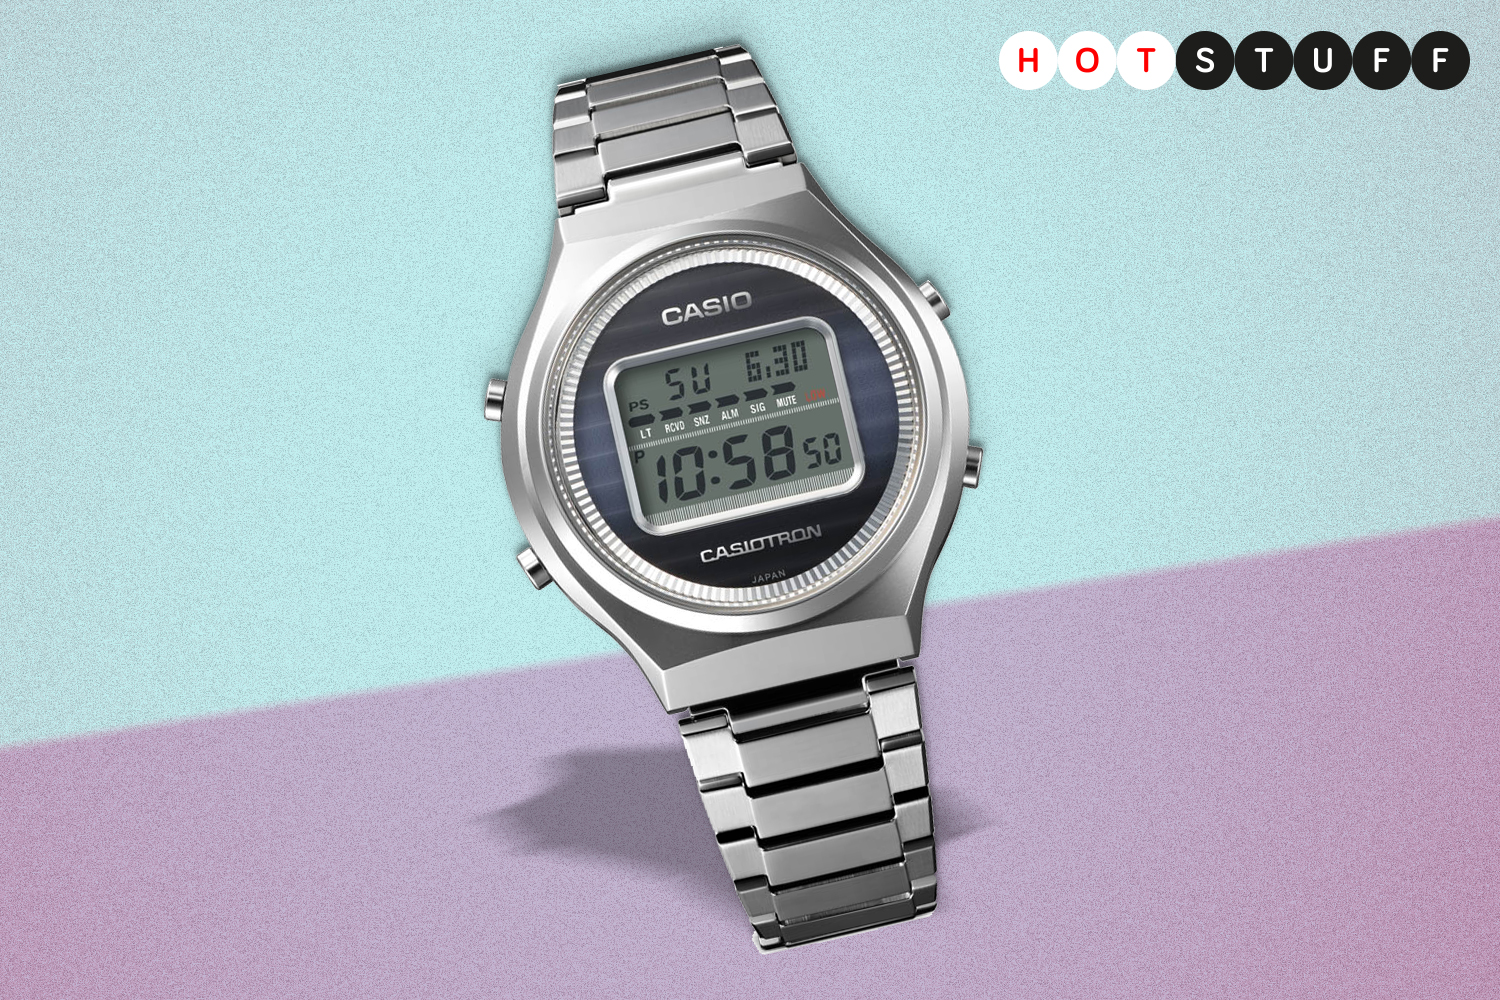 The Casio Casiotron is back (50 years later)